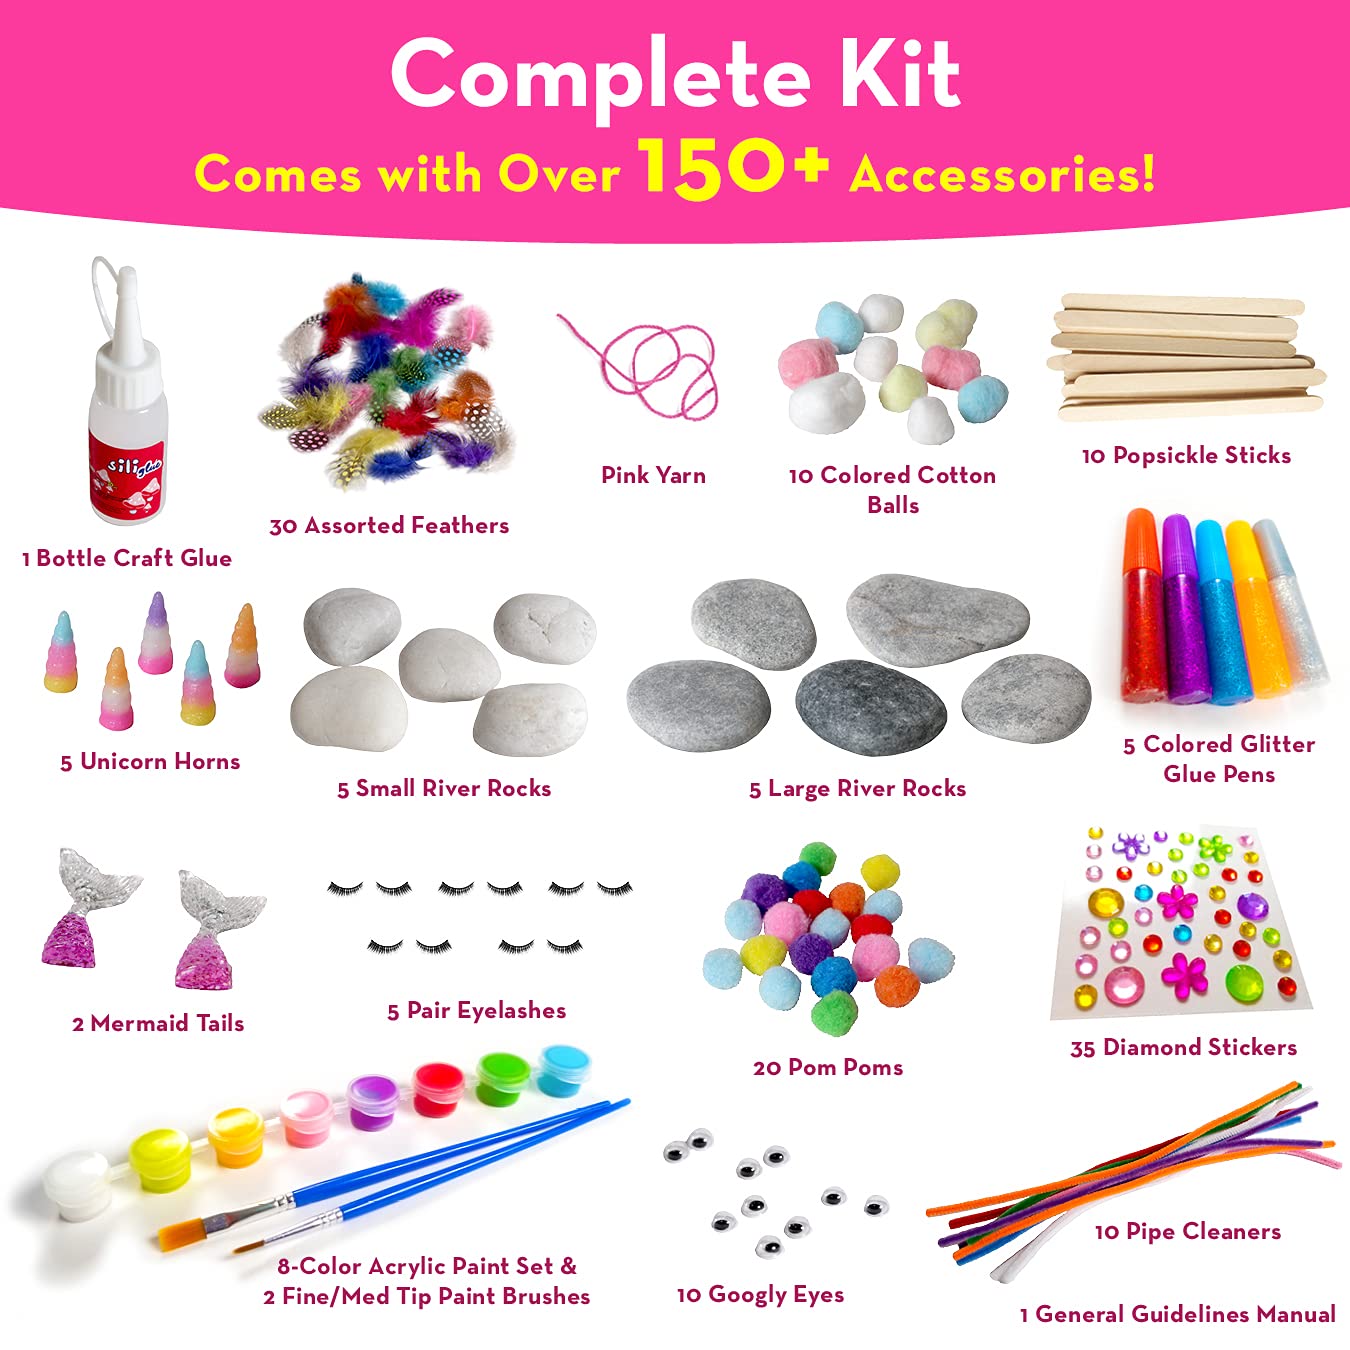 Rock Painting Kit for Kids with Unicorn Horns, Mermaid Tails and Butterfly Accessories - Includes Step-by-Step Rock Art Lessons for Girls and Boys All Ages - Arts and Crafts Paint Kits Gifts and Toys